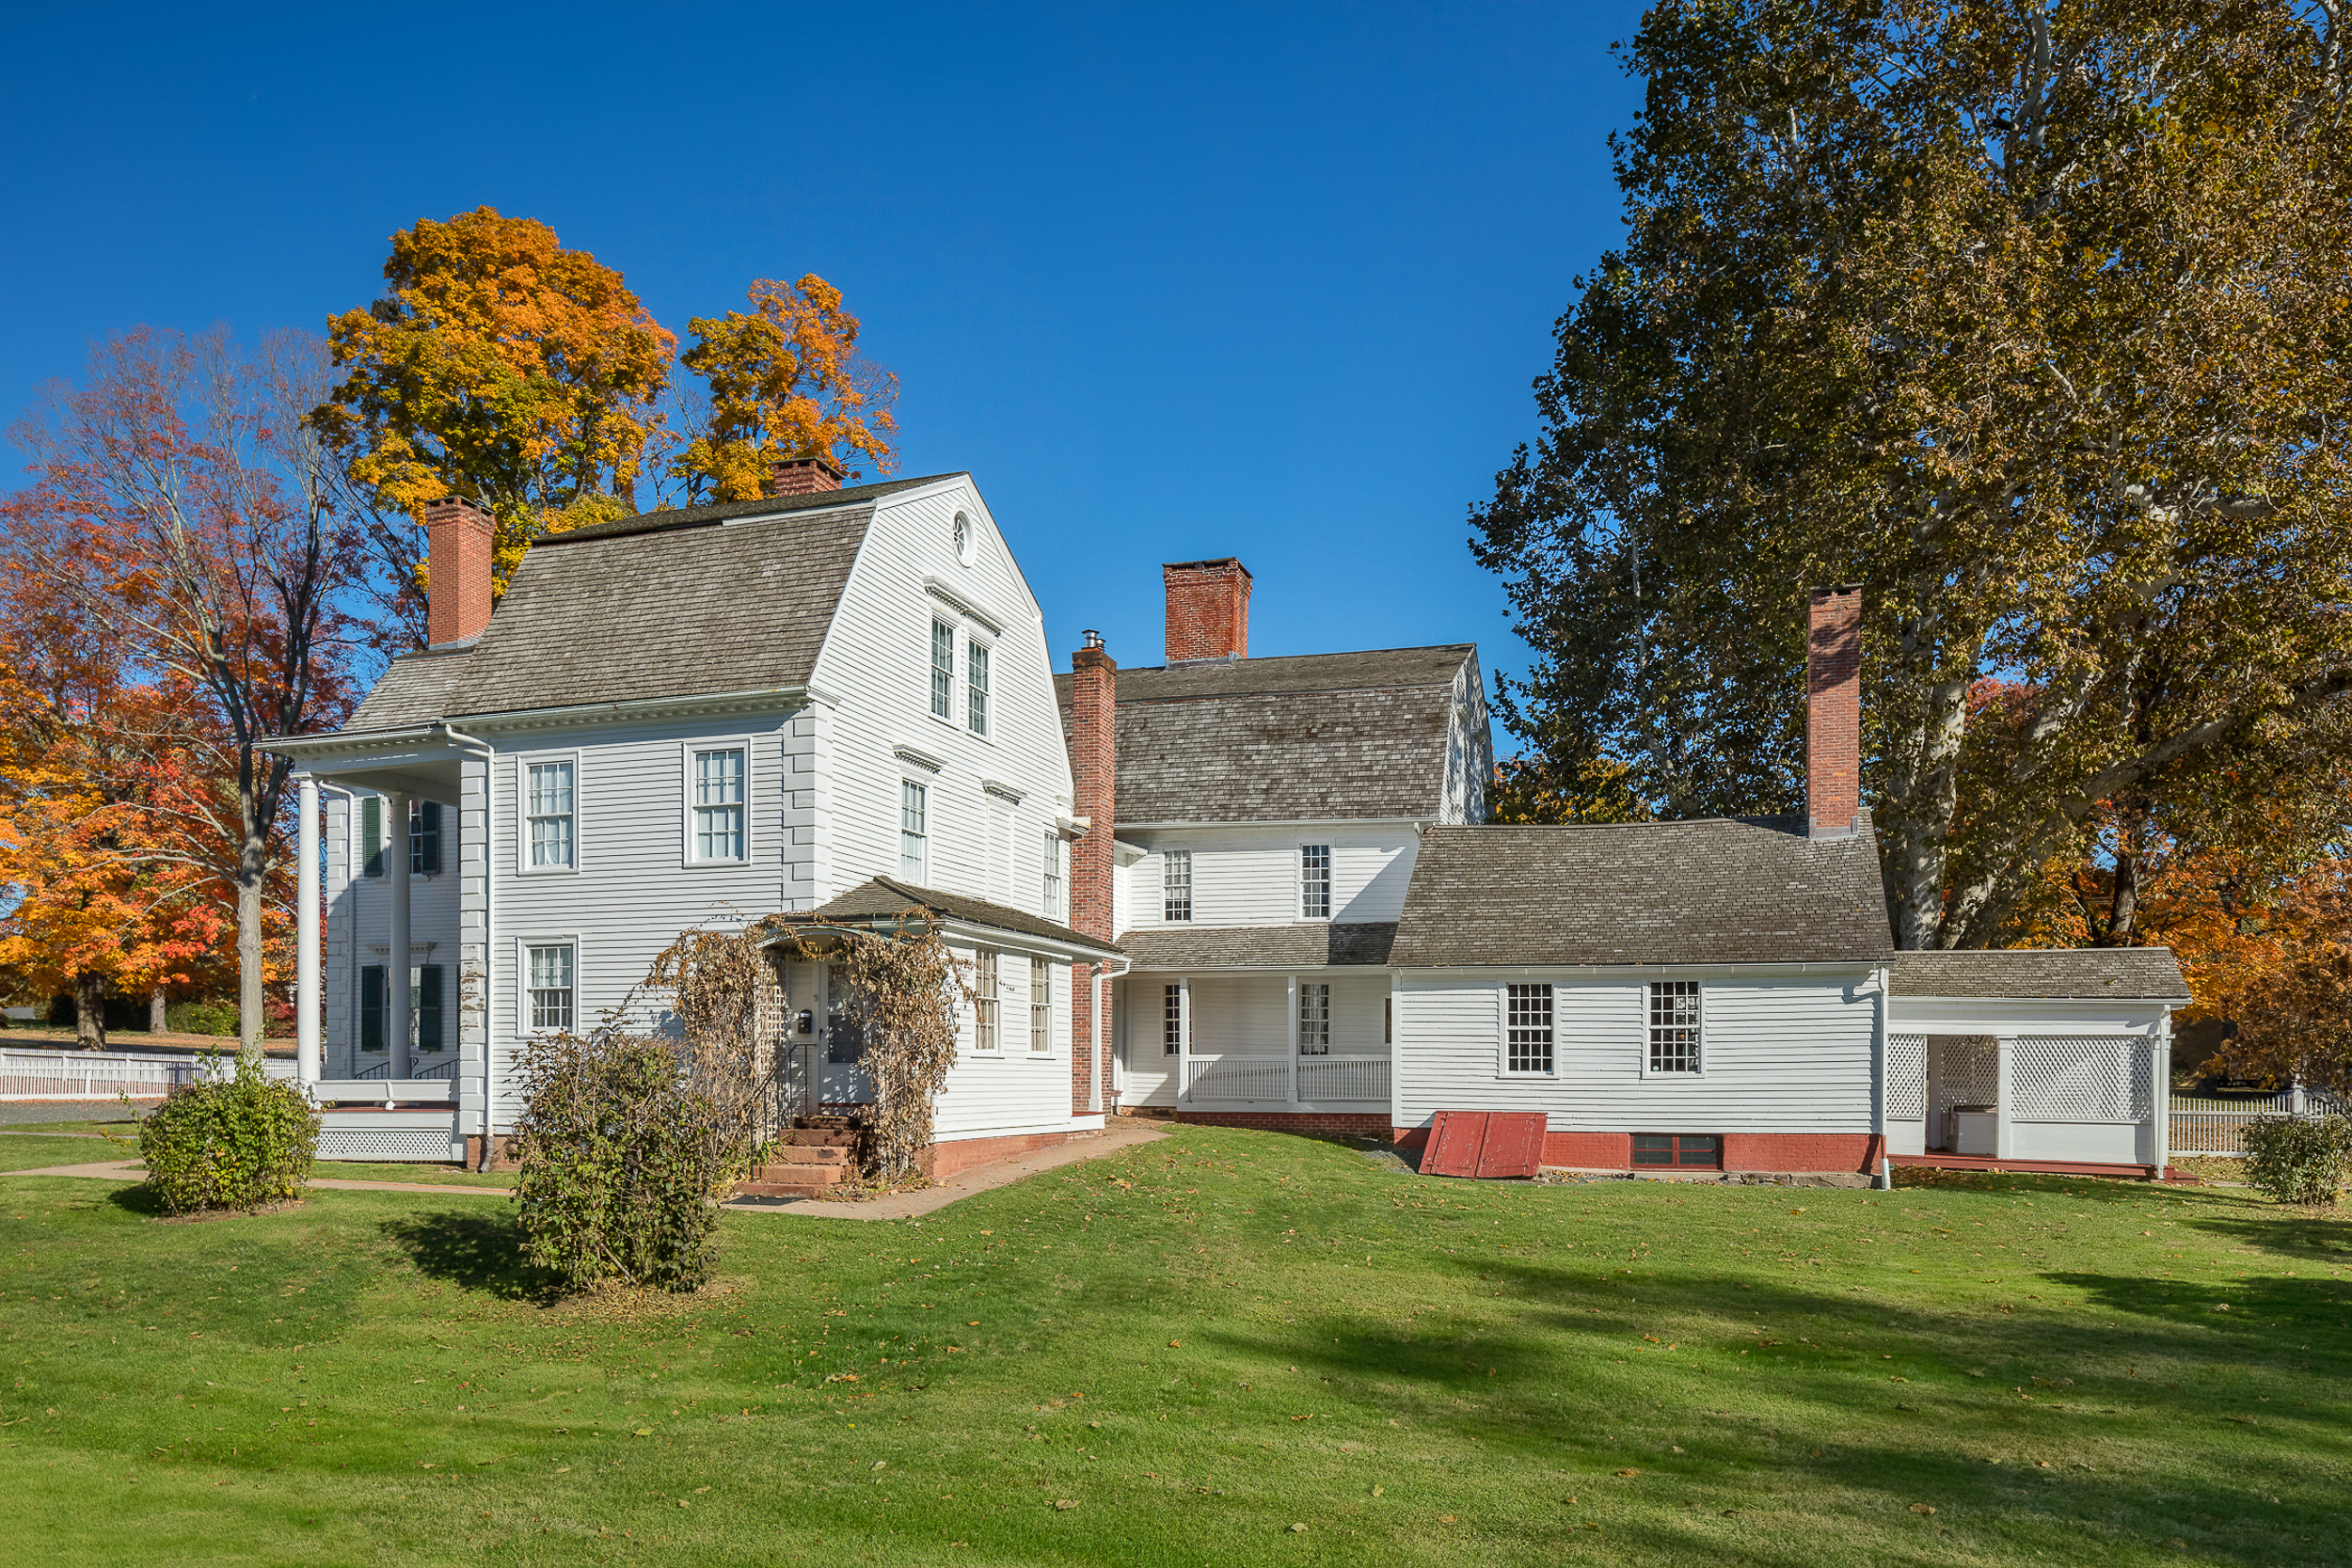 CT Landmarks' Phelps-Hathaway House. Suffield, CT